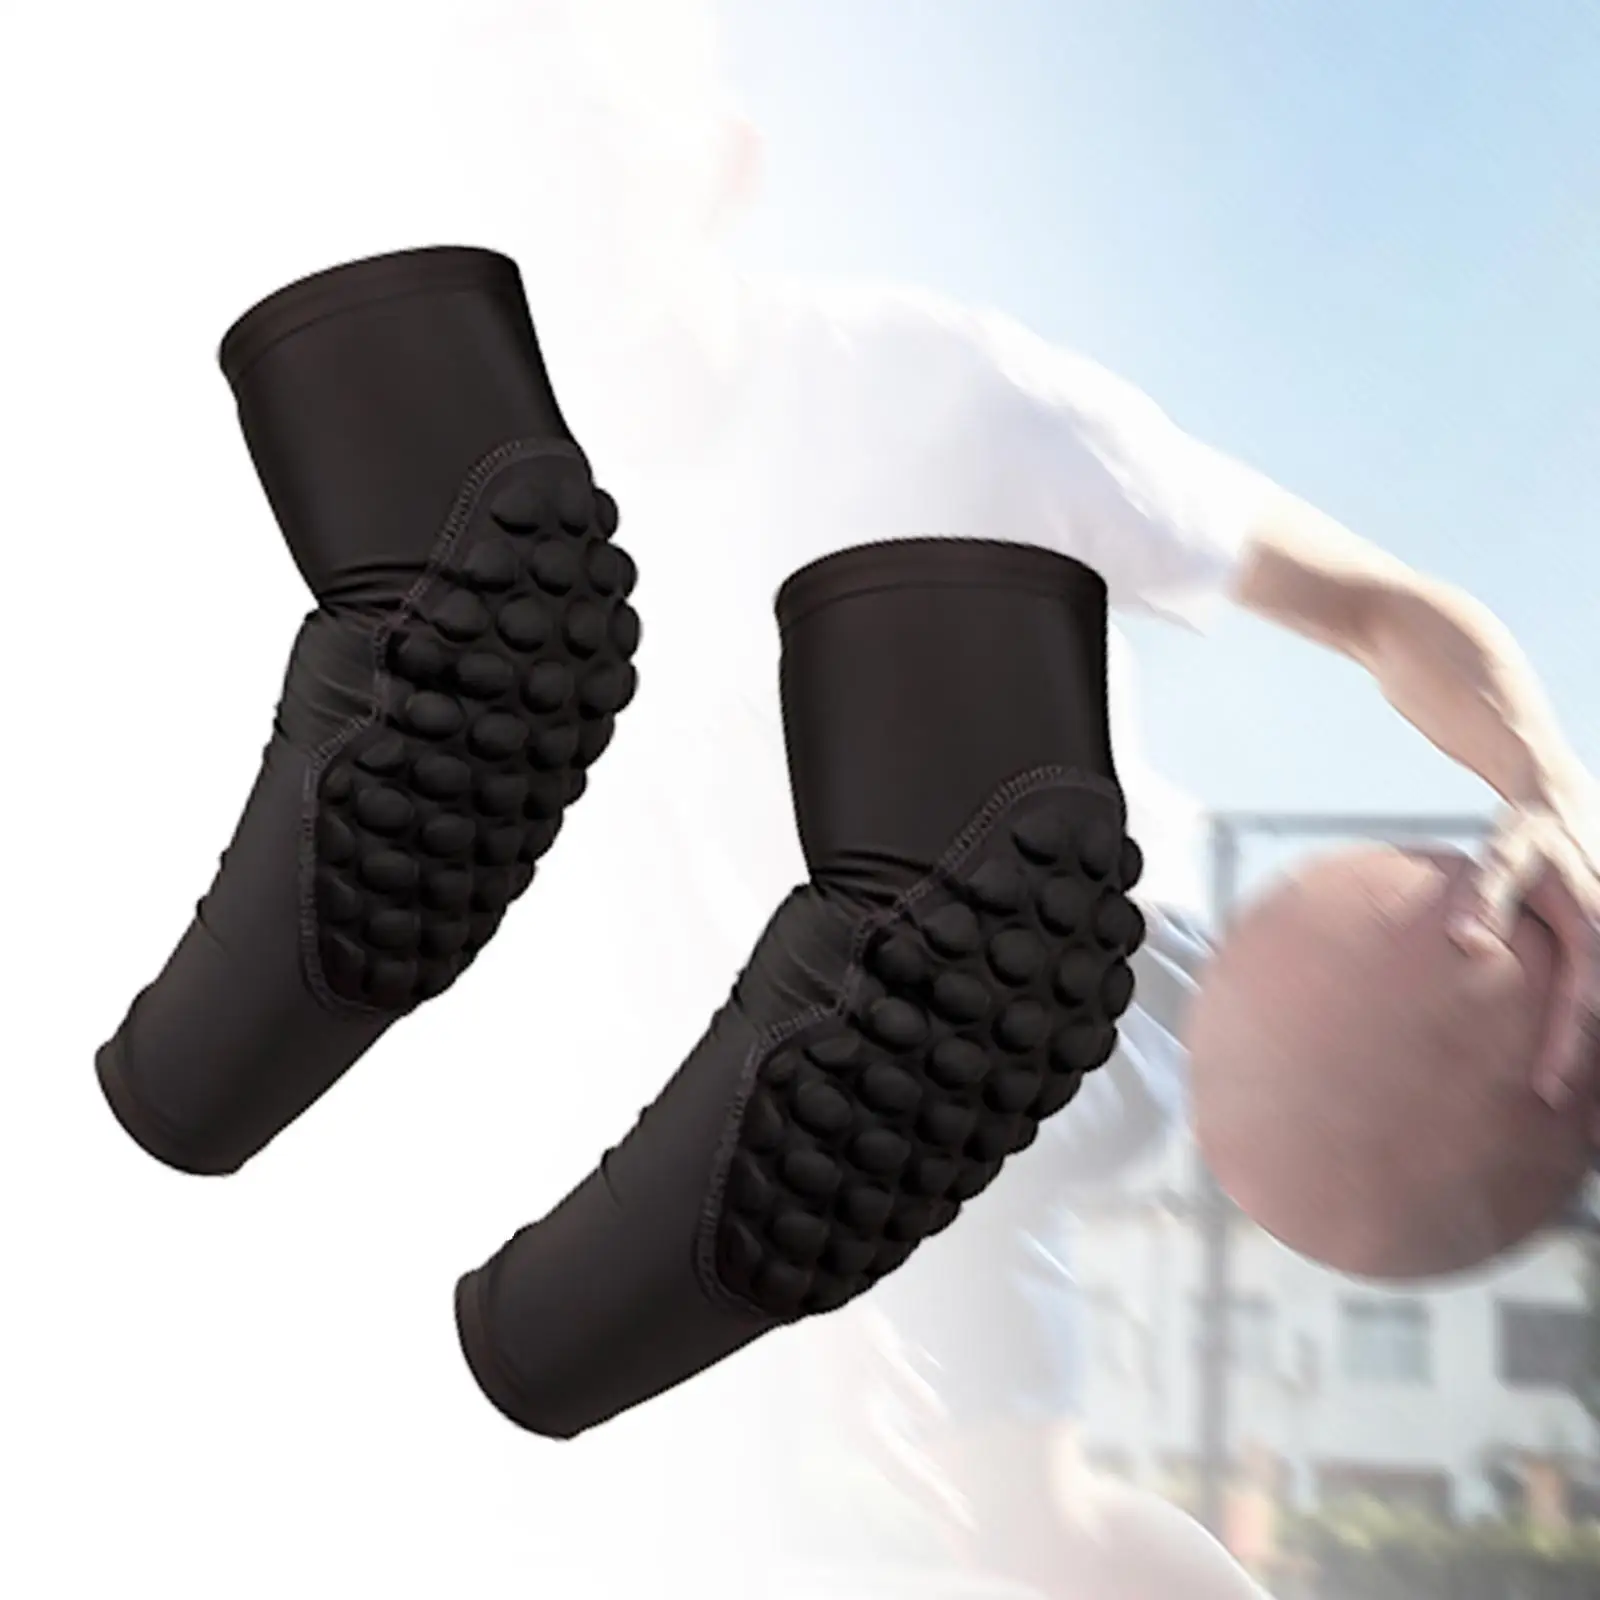 Elbow Pads Knee Pads Stretchy Elbow Support Covers Forearm Thicken 1 Pair Elbow Sleeves for Gym Cycling Football Baseball Tennis